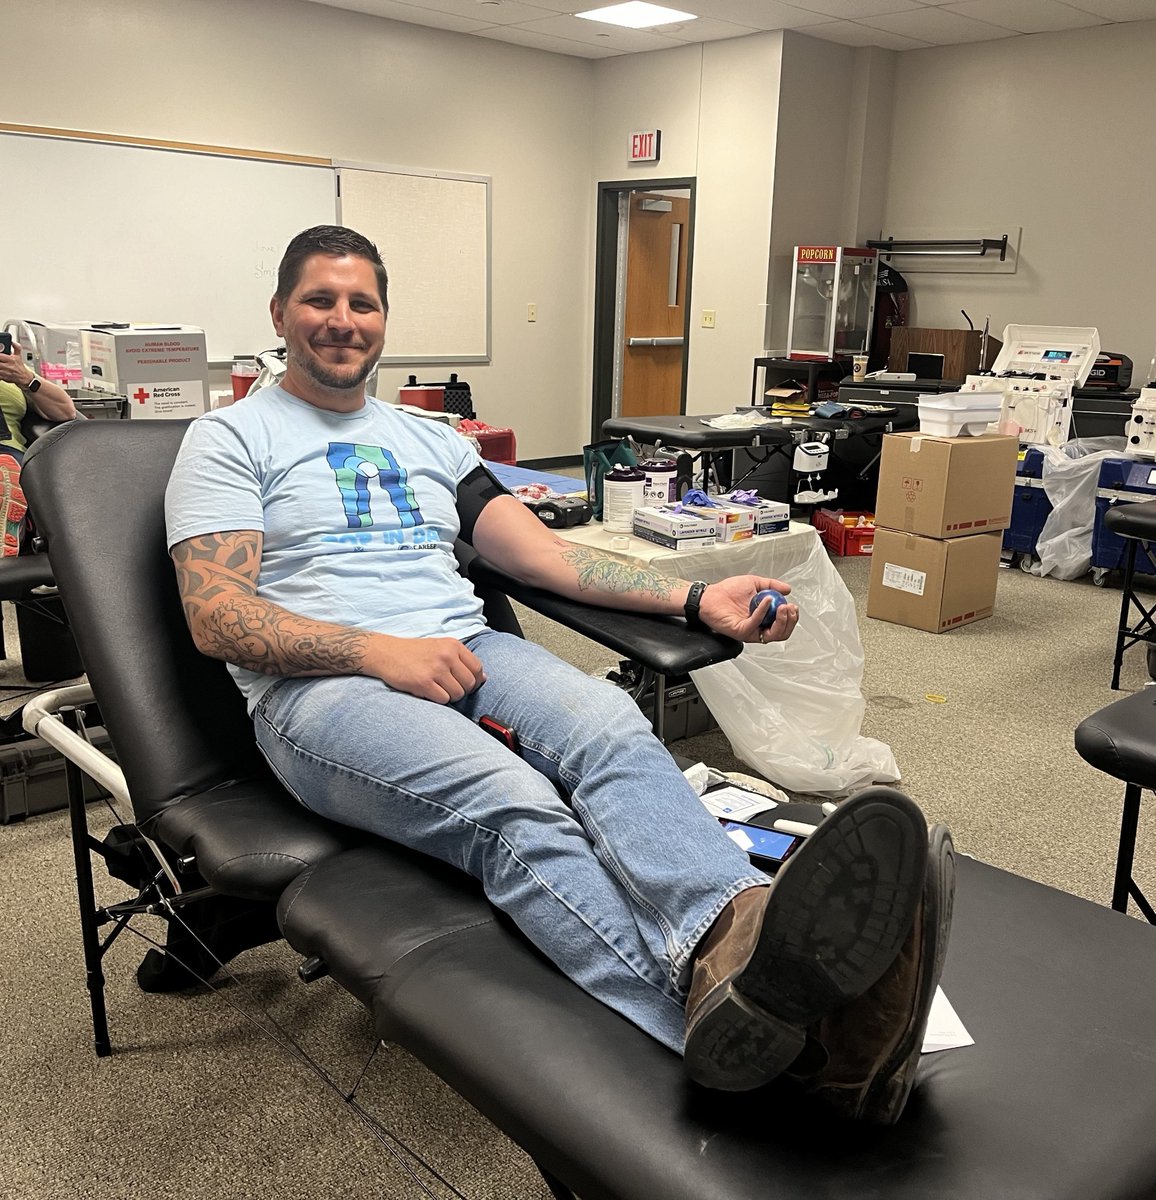 Today is the day! Swing by CACC to donate blood and support our HOSA students. The event is on until 2:30pm. #caccbest #cpsbest